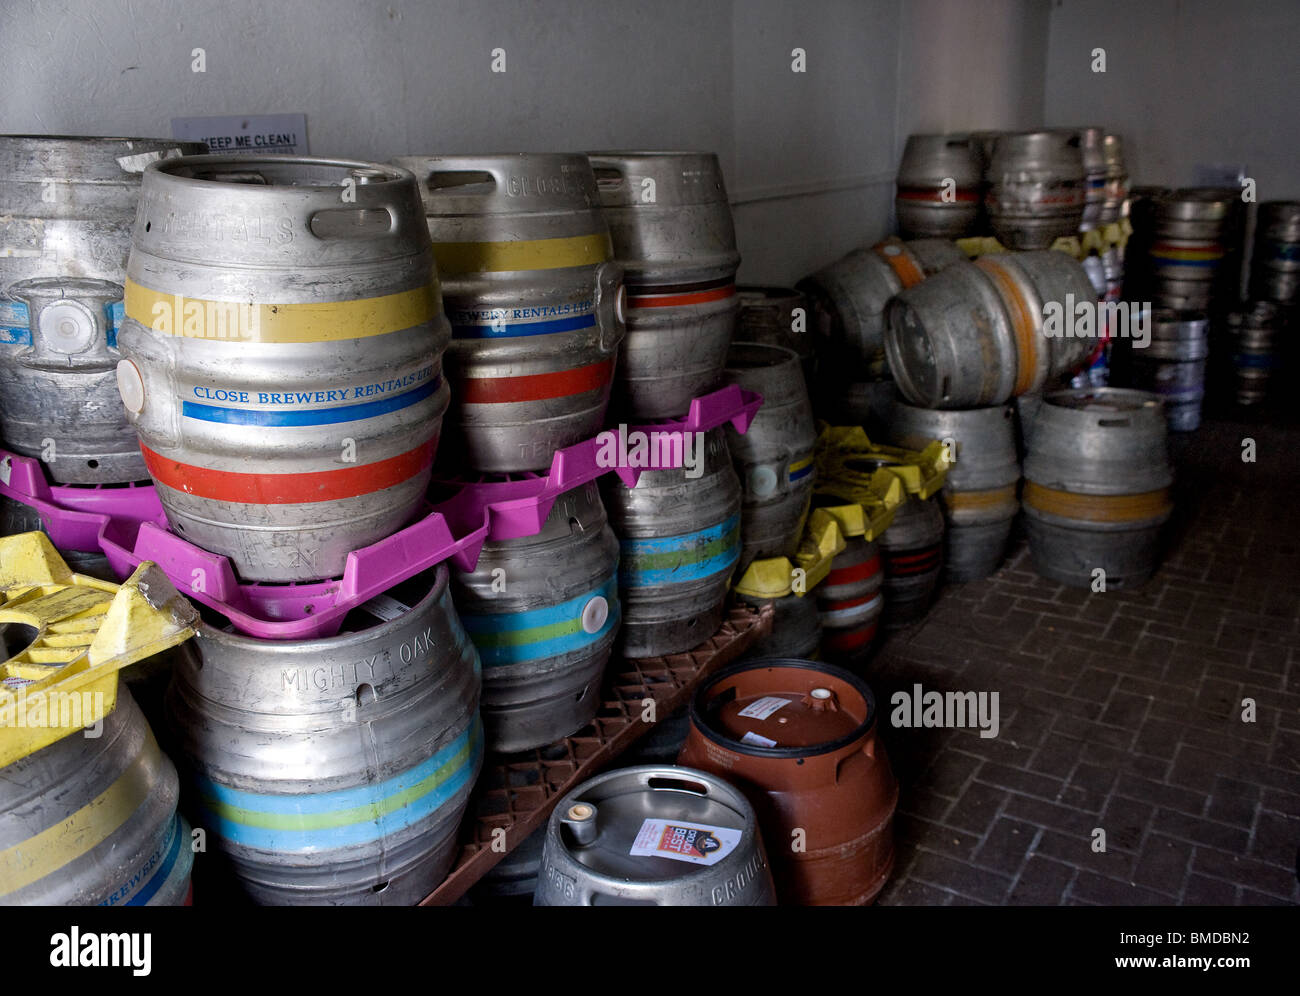 Barrels of real ale in a storage area of the Hoop Public House in Stock in Essex.  Photo by Gordon Scammell Stock Photo